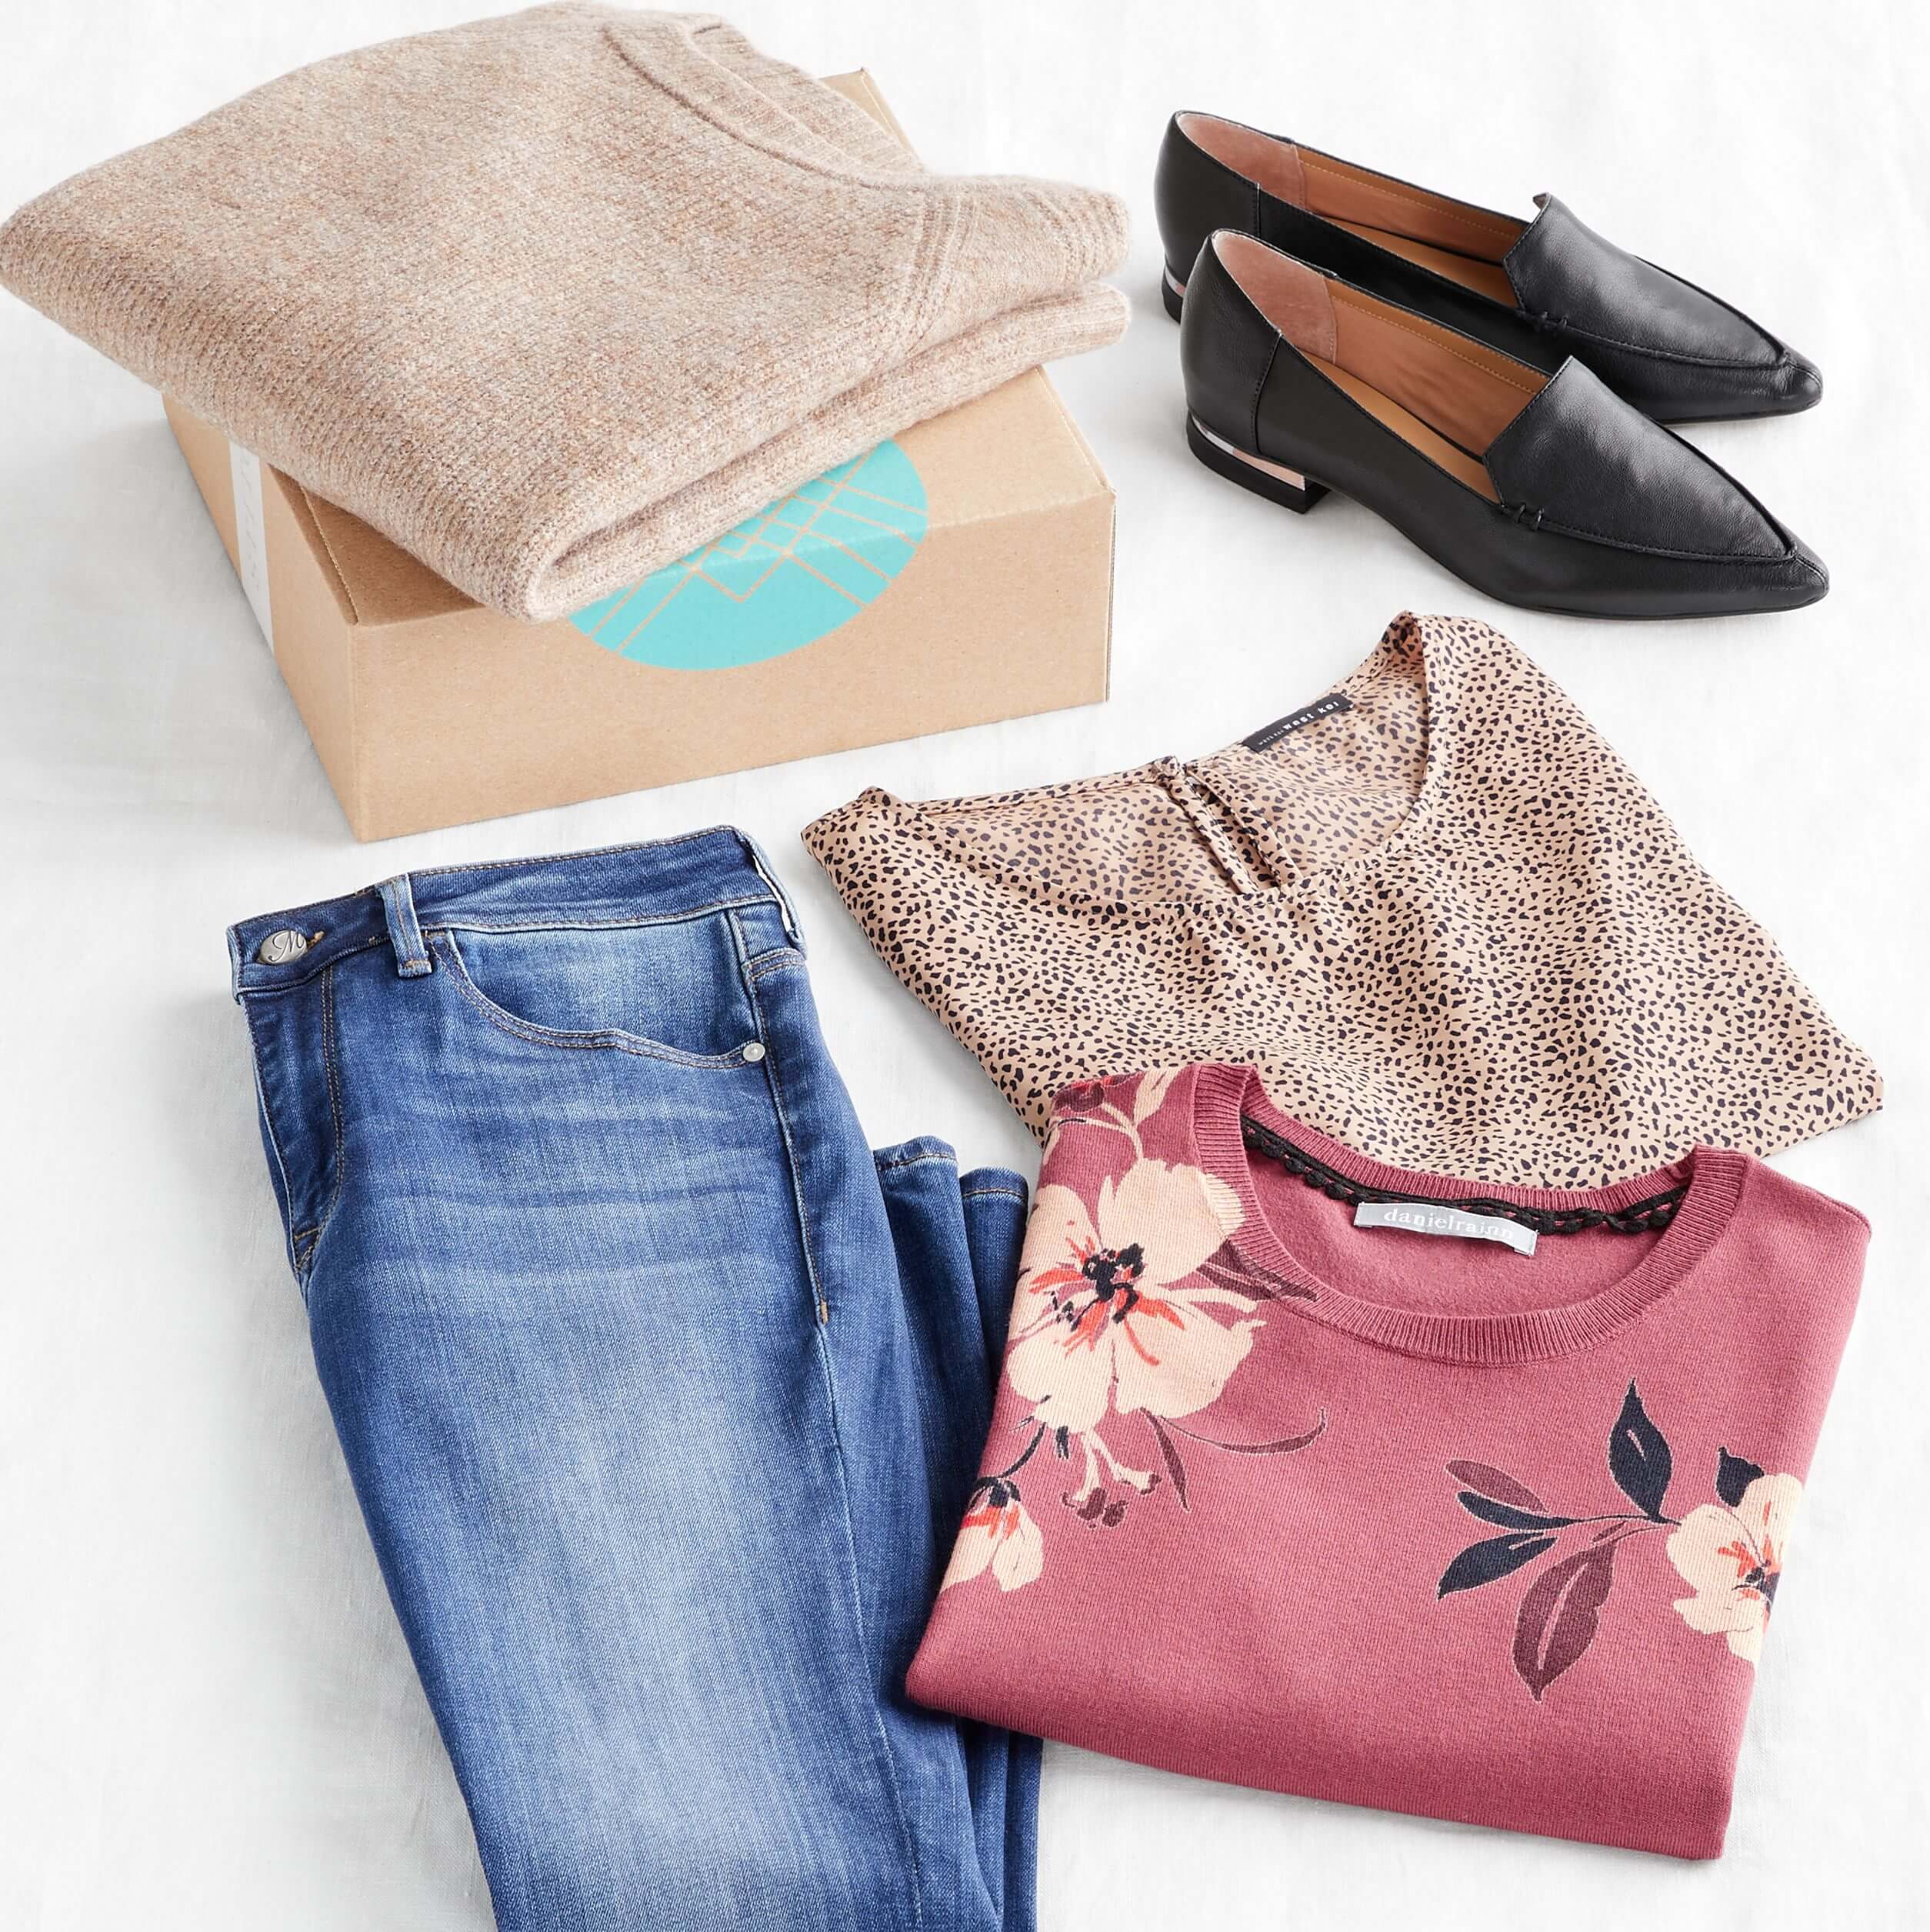 Stitch Fix Women's outfit laydown featuring a tan pullover on a Stitch Fix delivery box next to black loafers, blue jeans, brown animal-print shirt and pink floral pullover.